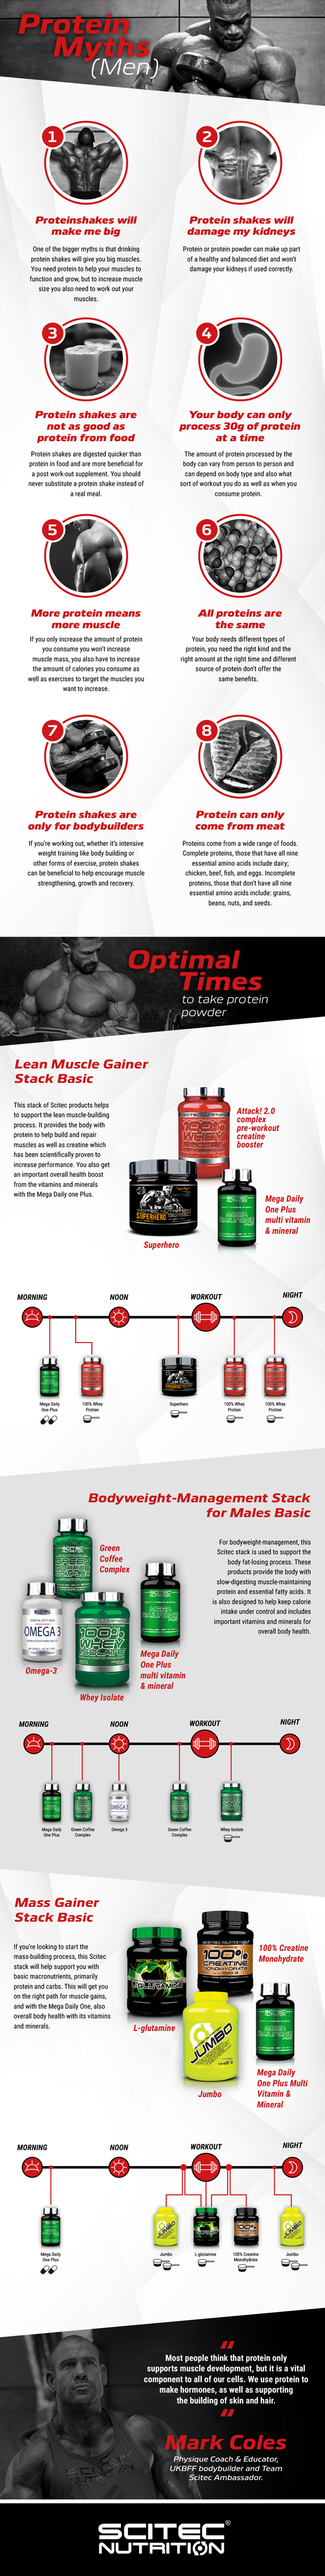 Scitec - Protein Myths Mens Infographic